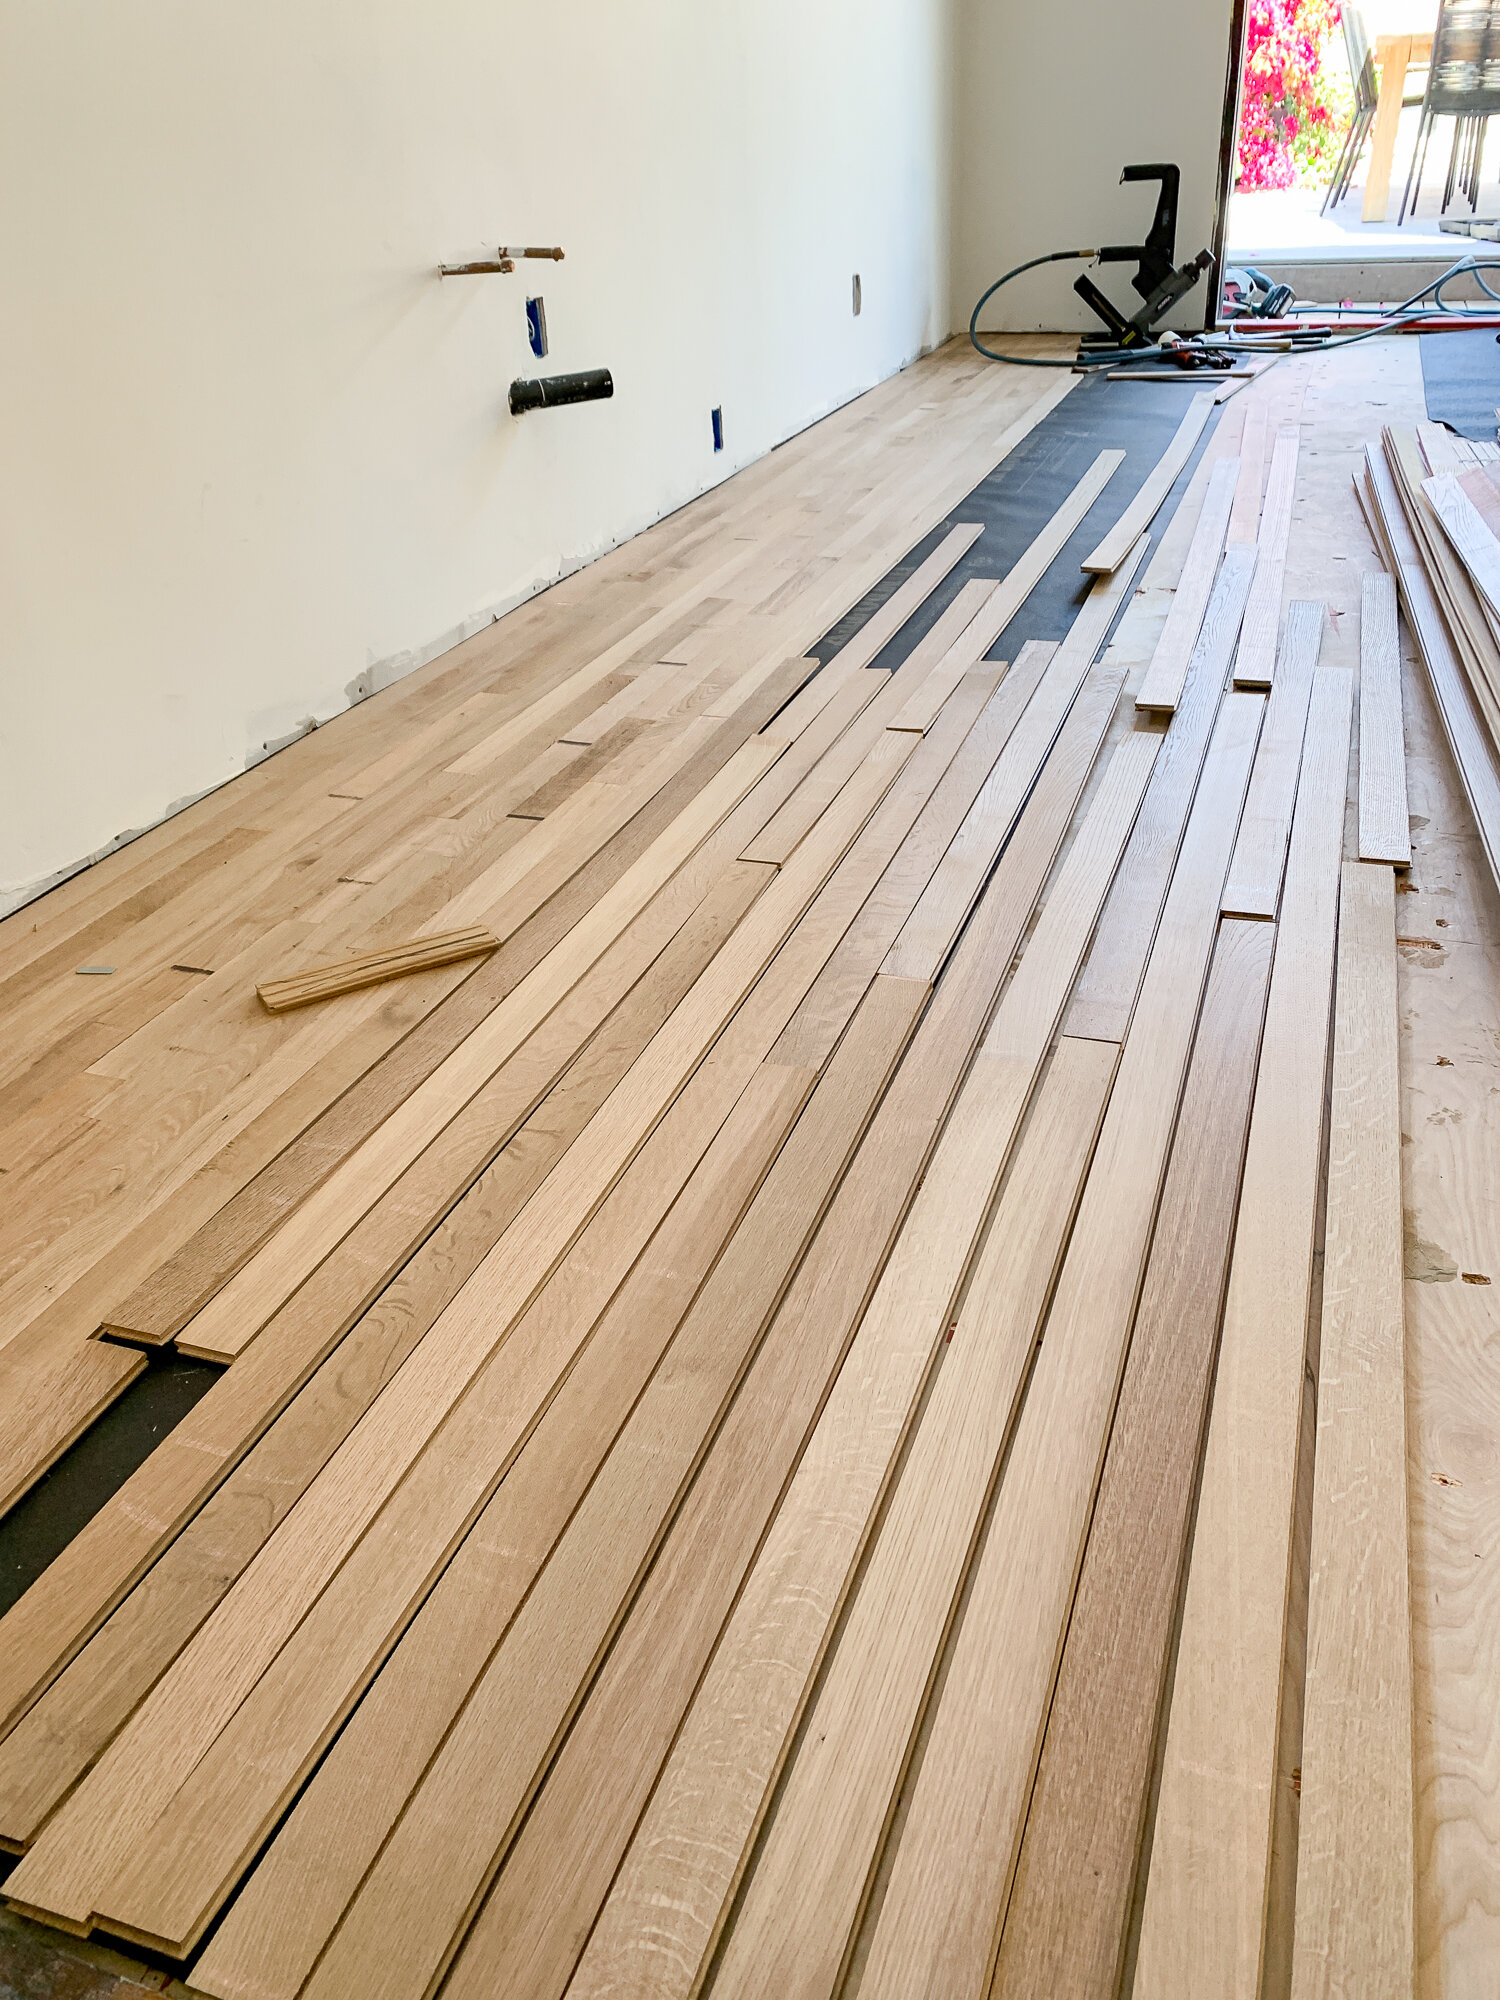 Installing New Hardwood Floors In Our, How To Install New Hardwood Floors